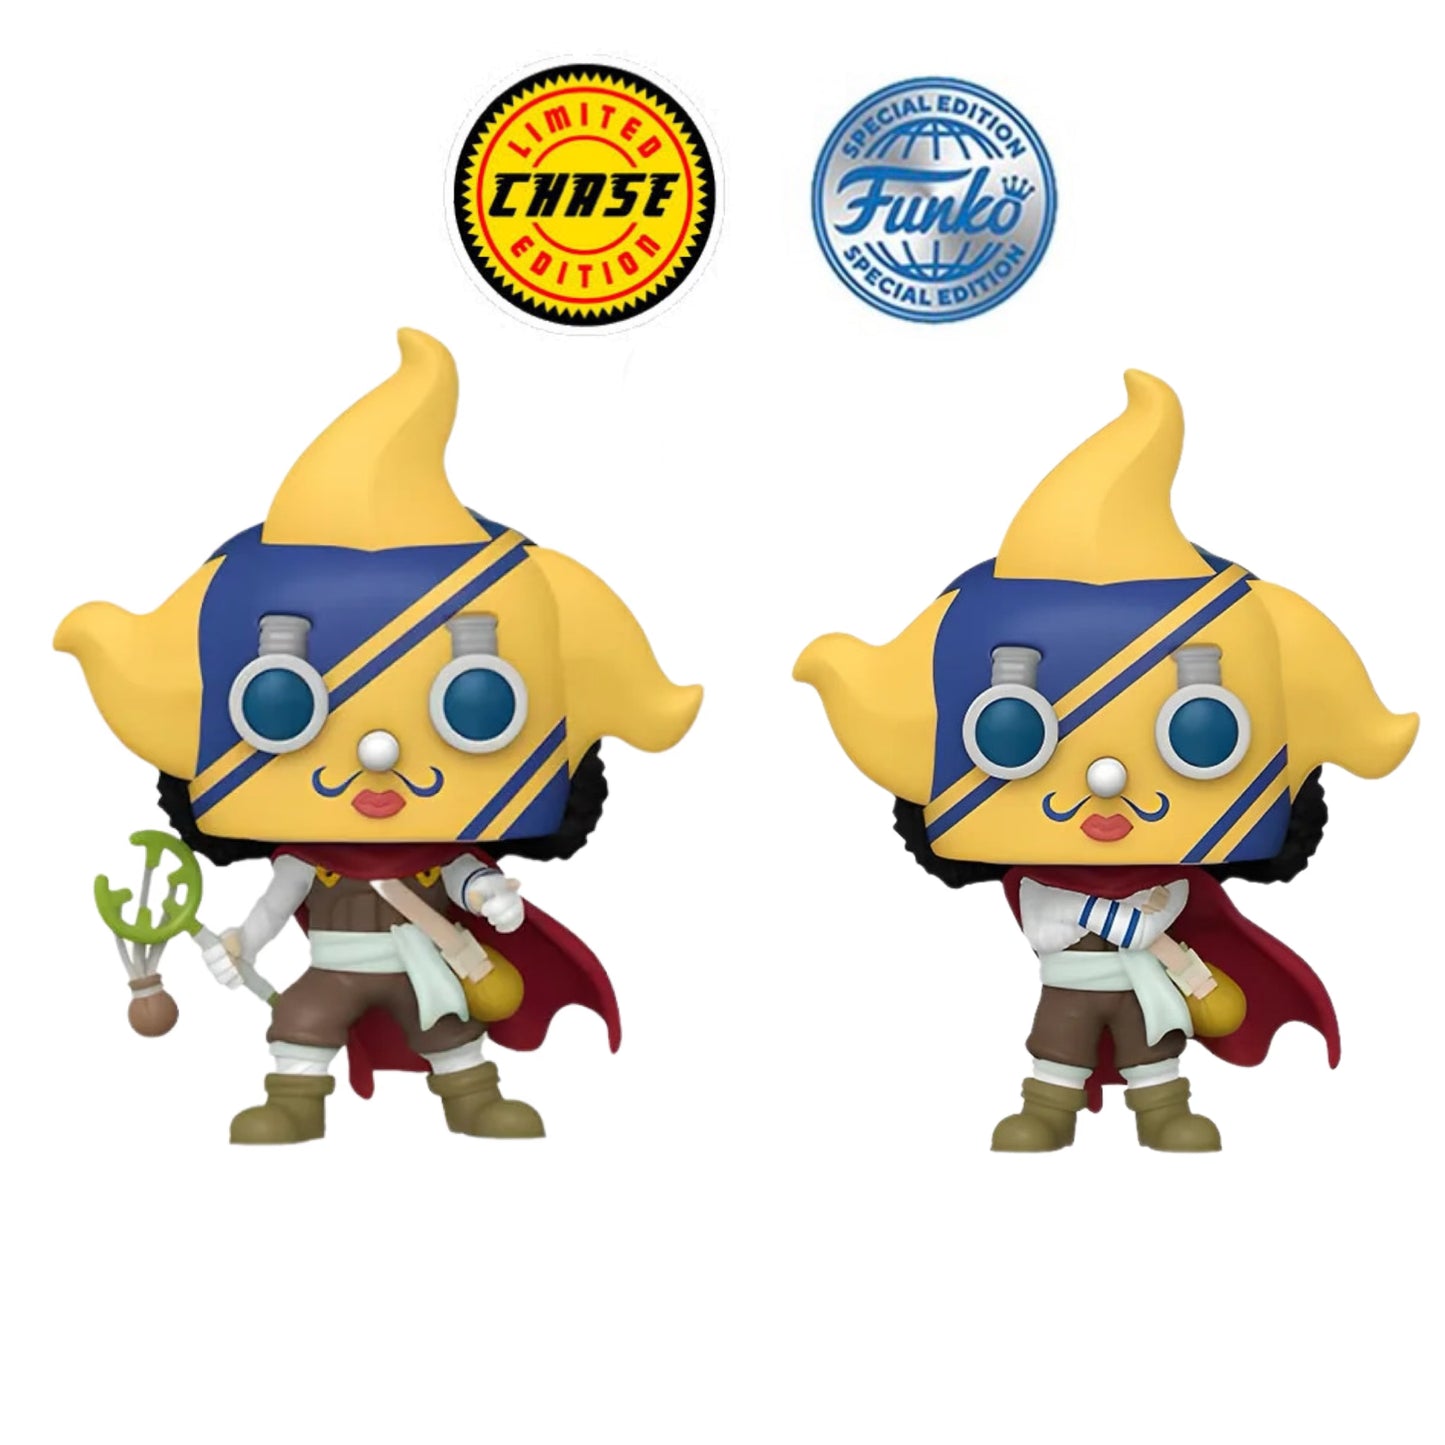 Funko Pop One Piece - Sniper King ( CHASE Bundle )